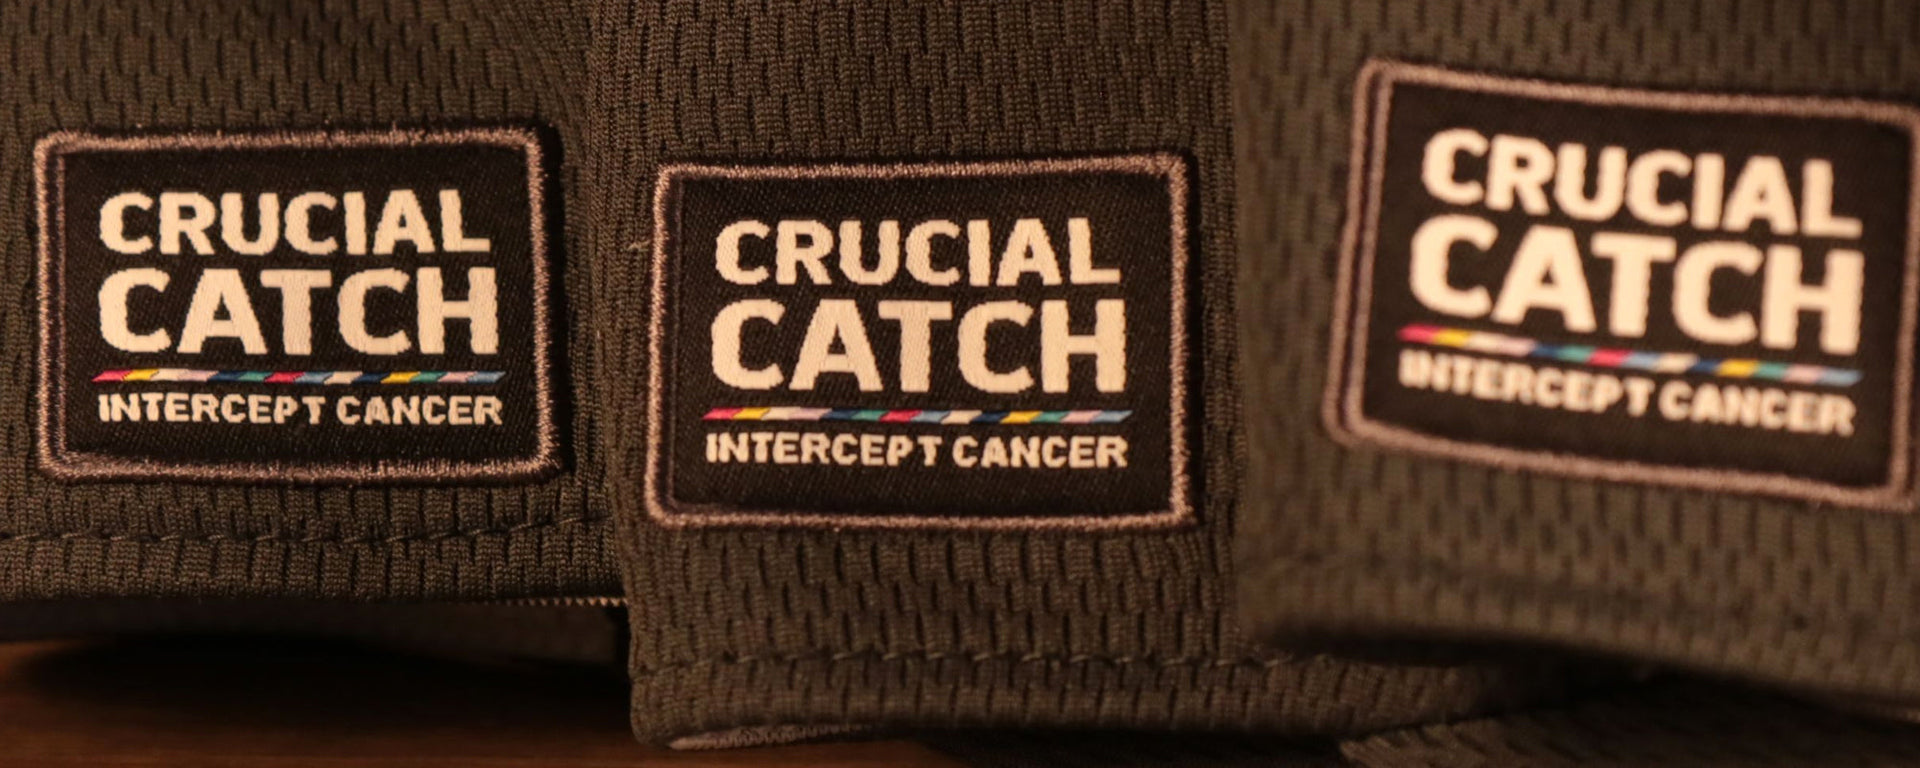 2021 NFL Crucial Catch Cancer Awareness On Field Sideline Hats